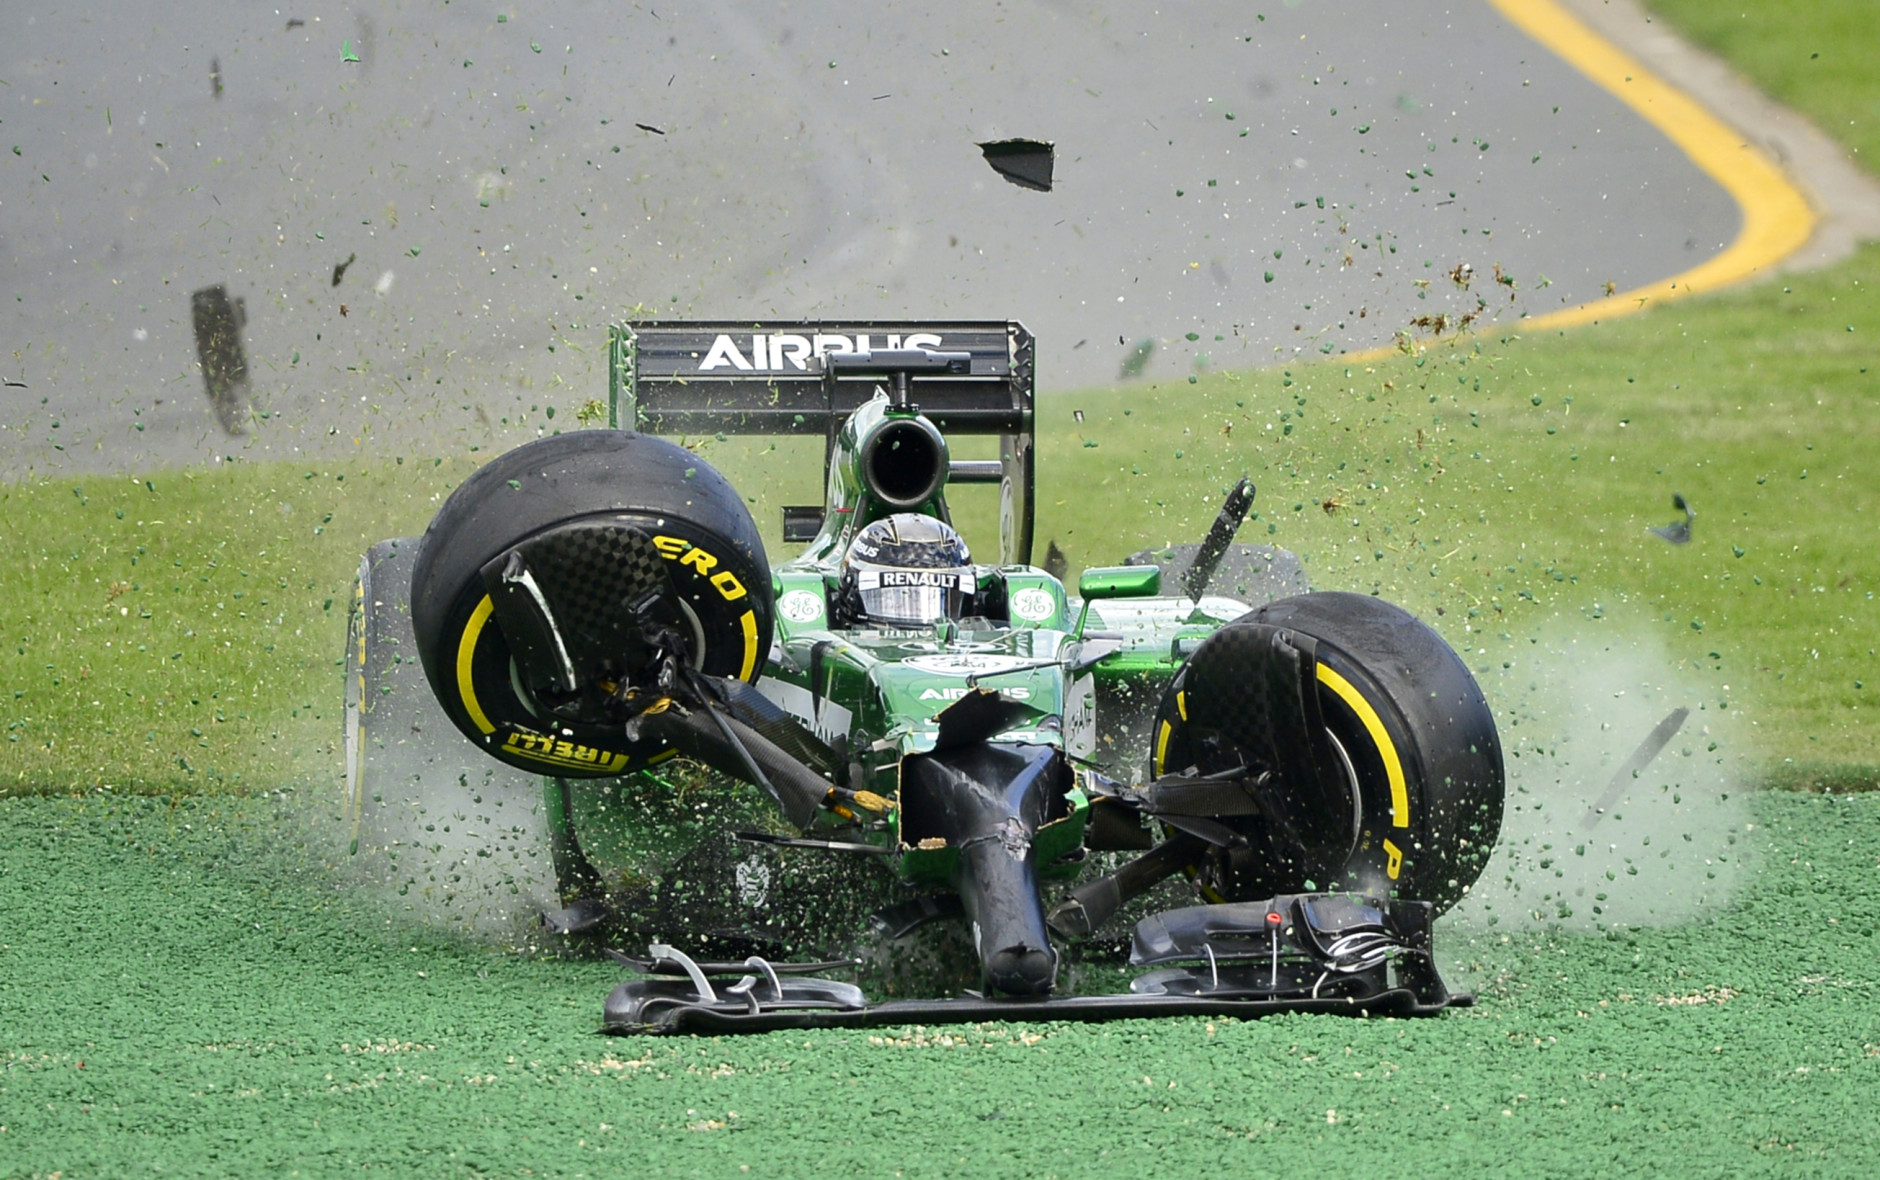 FOR USE AS DESIRED, YEAR END PHOTOS - FILE - Caterham driver Kamui Kobayashi of Japan runs off the track after he crashed with Williams driver Felipe Massa of Brazil on the first lap of the Australian Formula One Grand Prix at Albert Park in Melbourne, Australia, Sunday, March 16, 2014. Both Massa and Kobayashi walked away from the accident. (AP Photo/Ross Land, File)